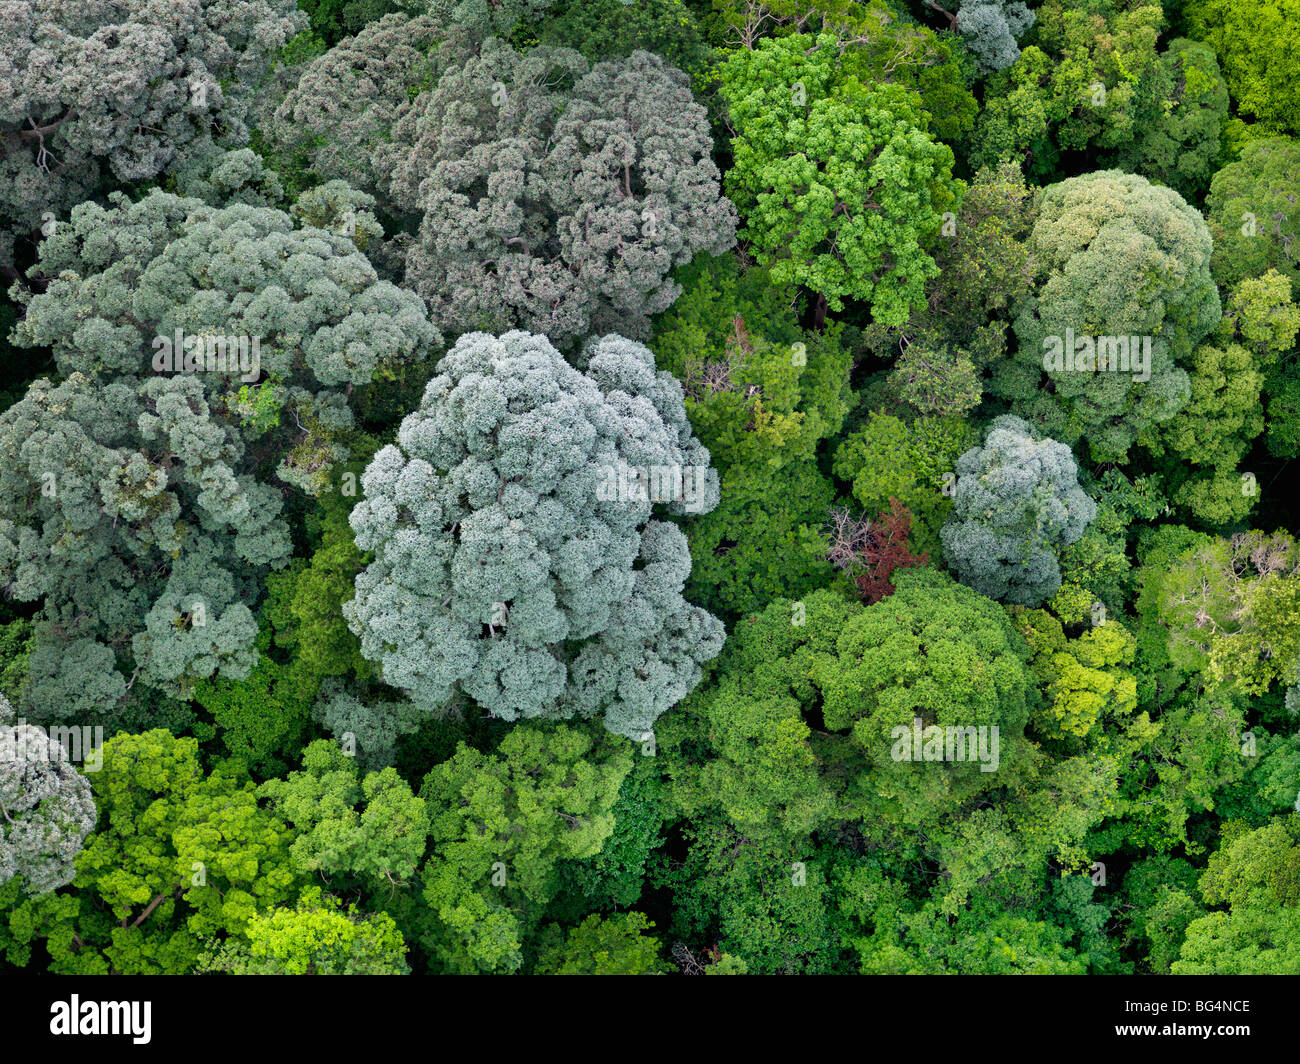 An aerial view of Johor's lush forest. Stock Photo